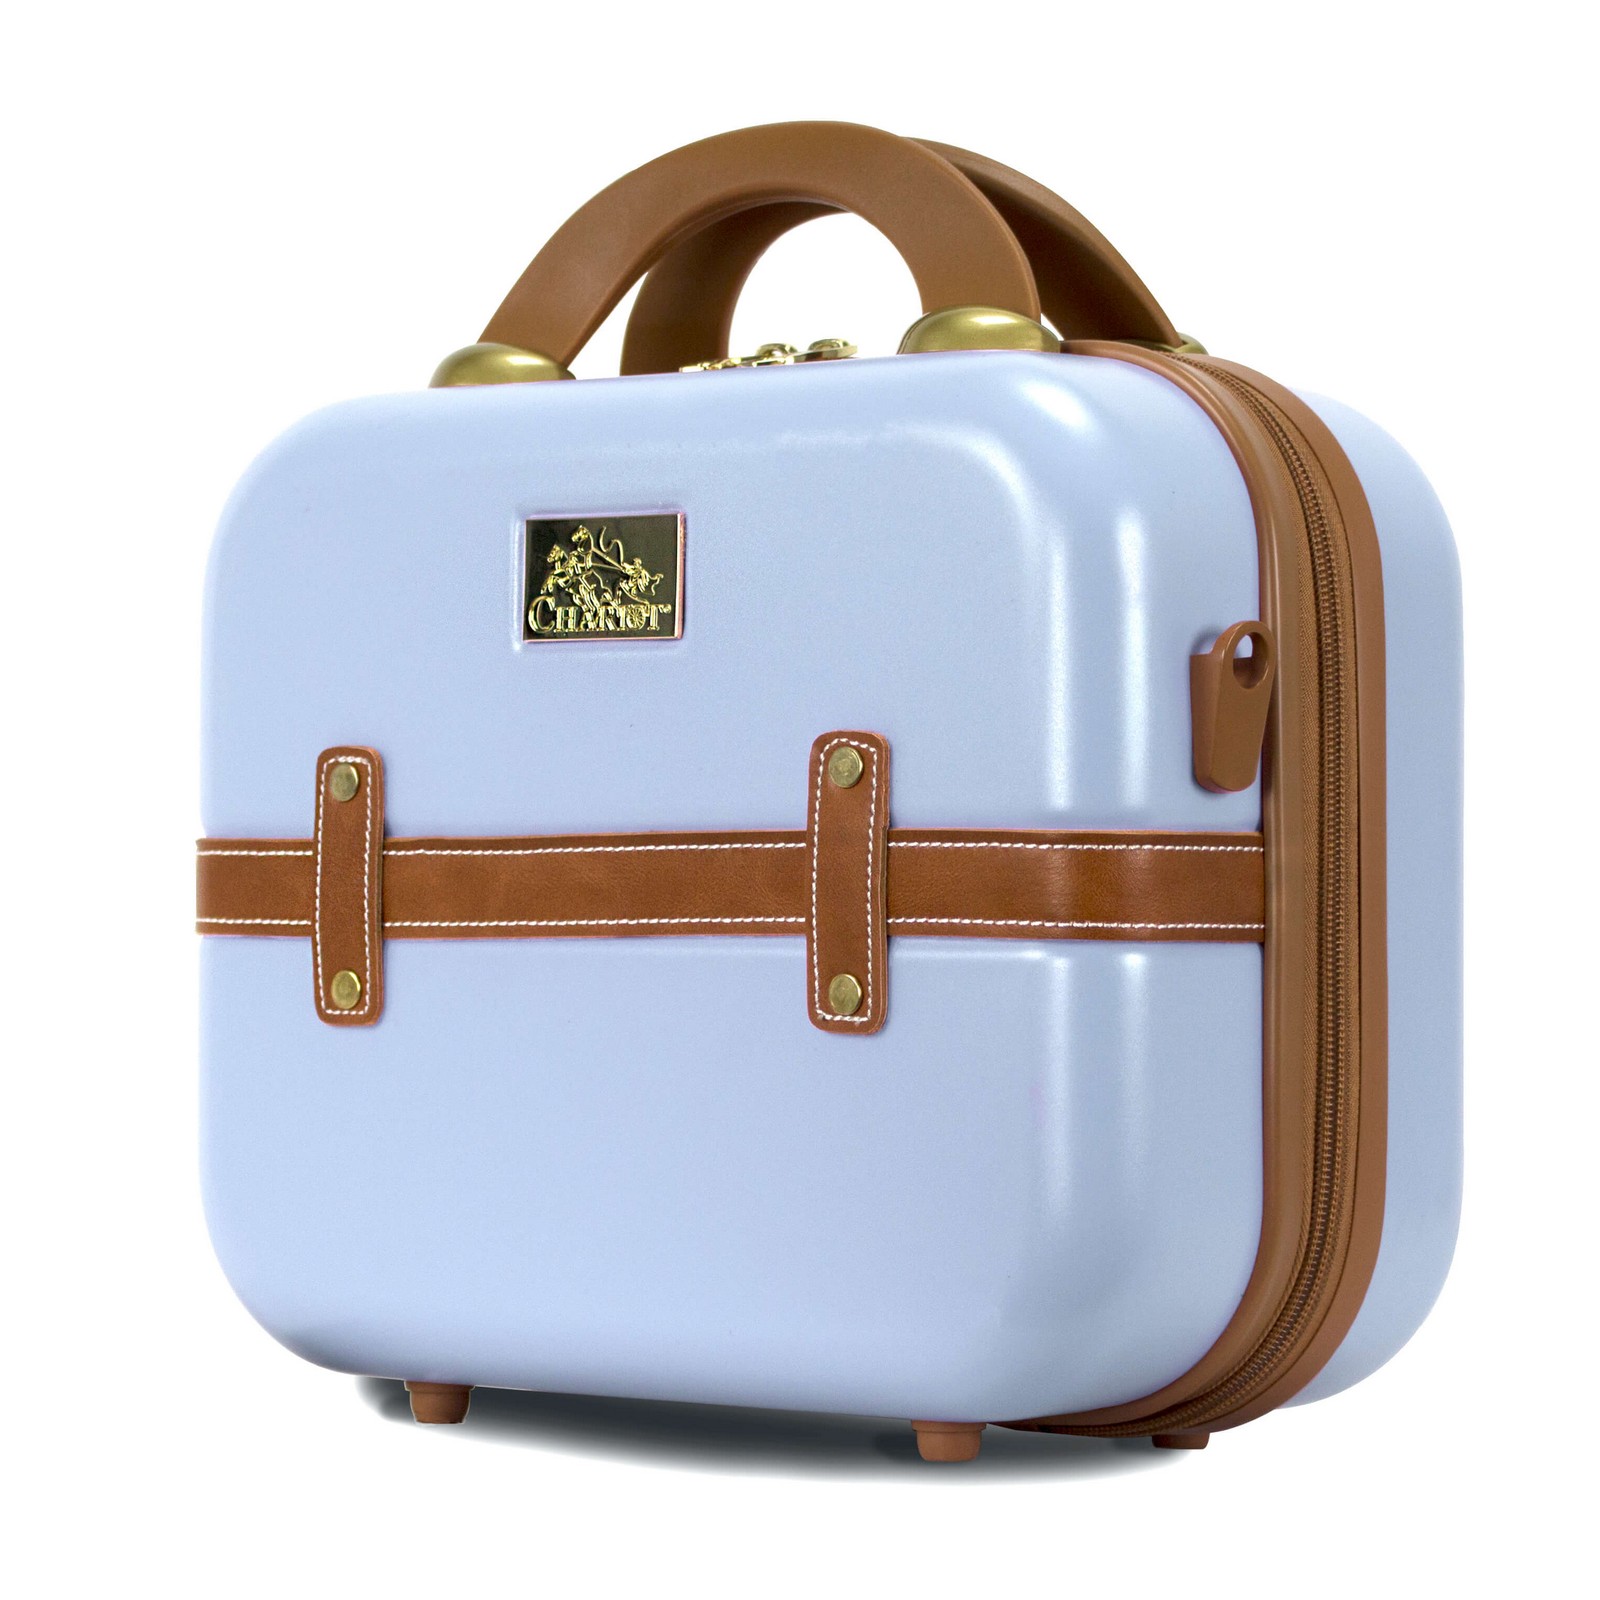 Chariot Gatsby 2-Piece Hardside Carry-On Luggage Set - Ice Blue - image 4 of 6